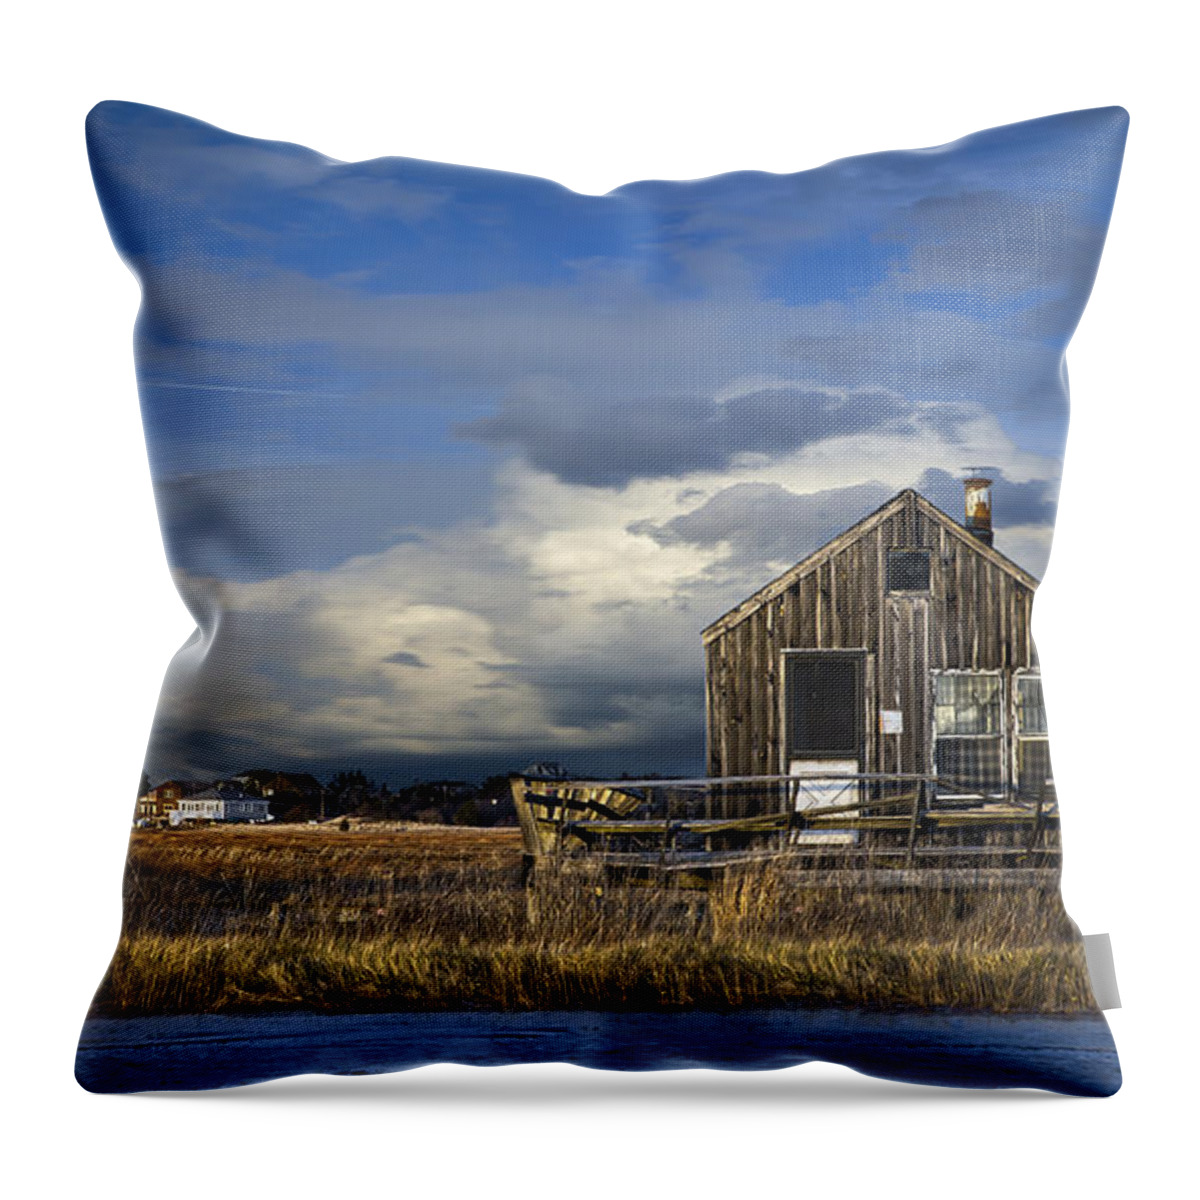 Plum Throw Pillow featuring the photograph Plum Island Shack by Rick Mosher